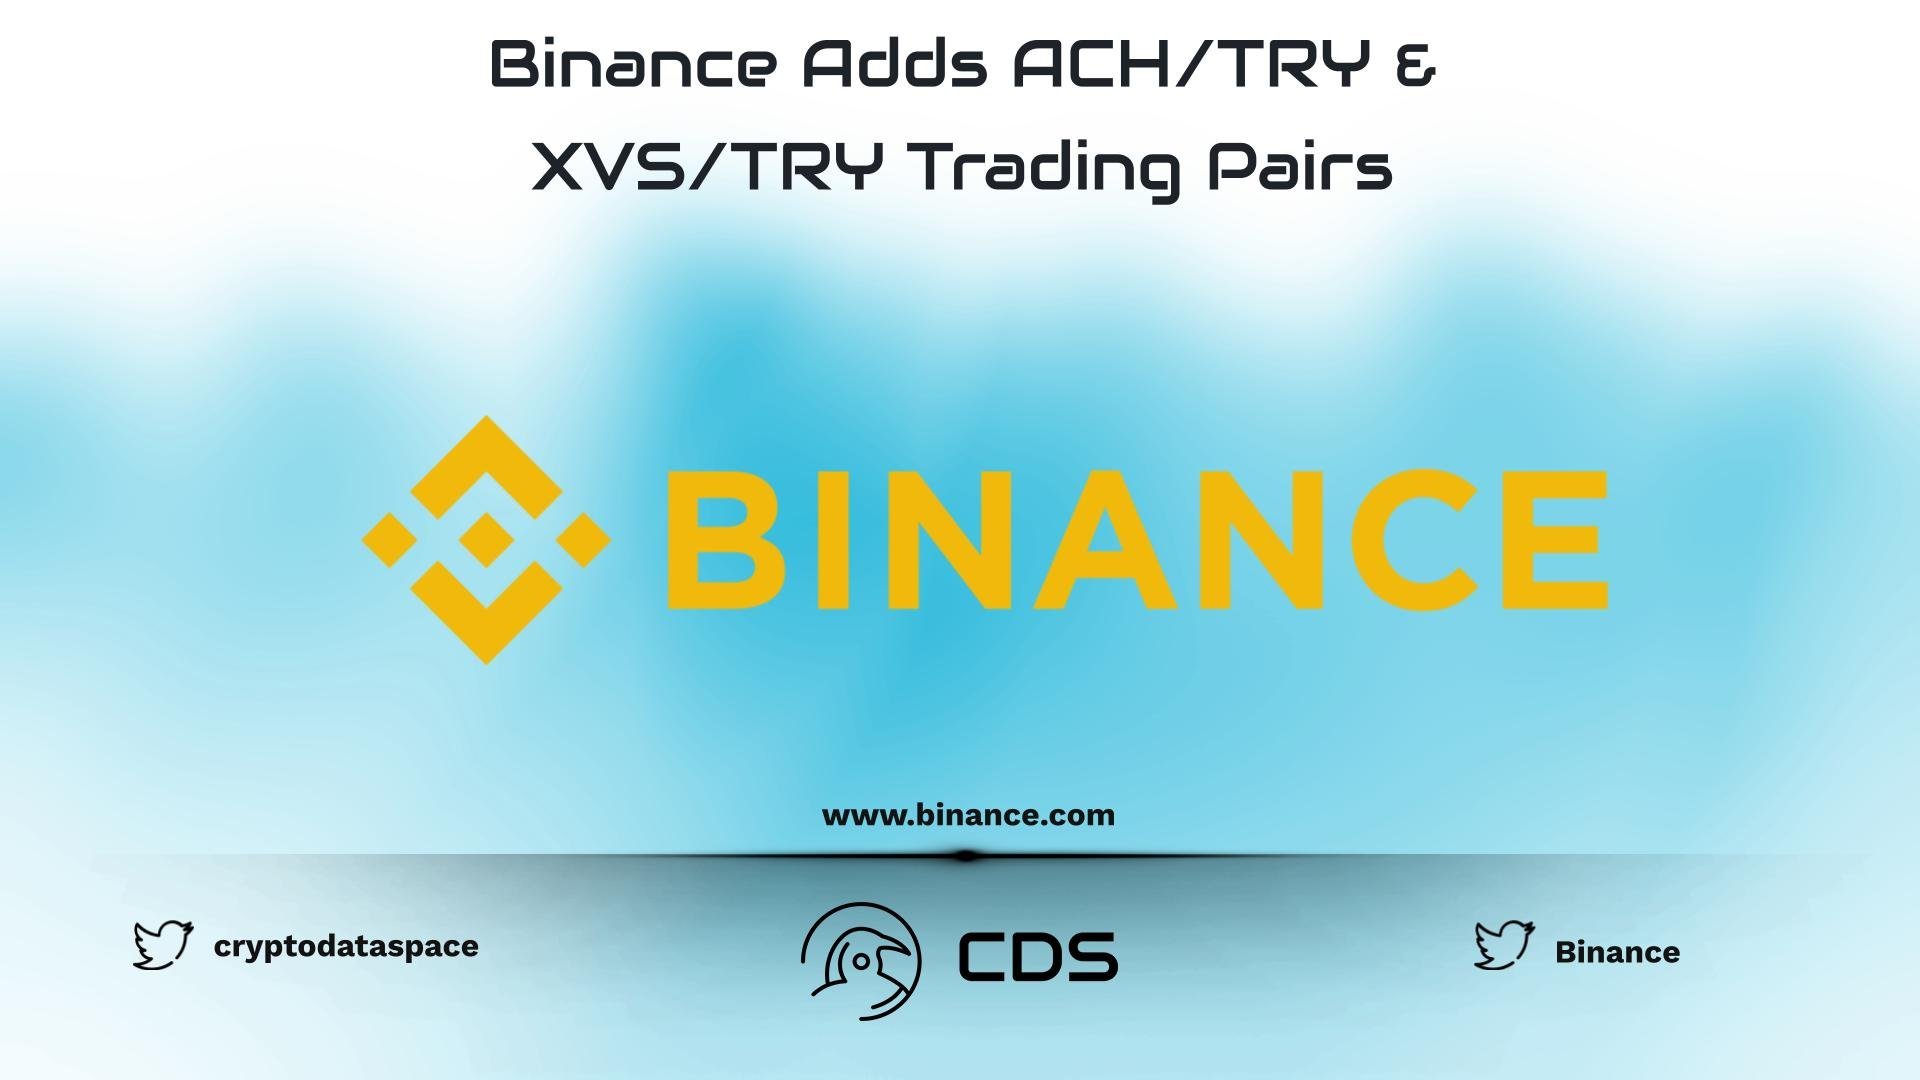 Binance Adds ACH/TRY & XVS/TRY Trading Pairs